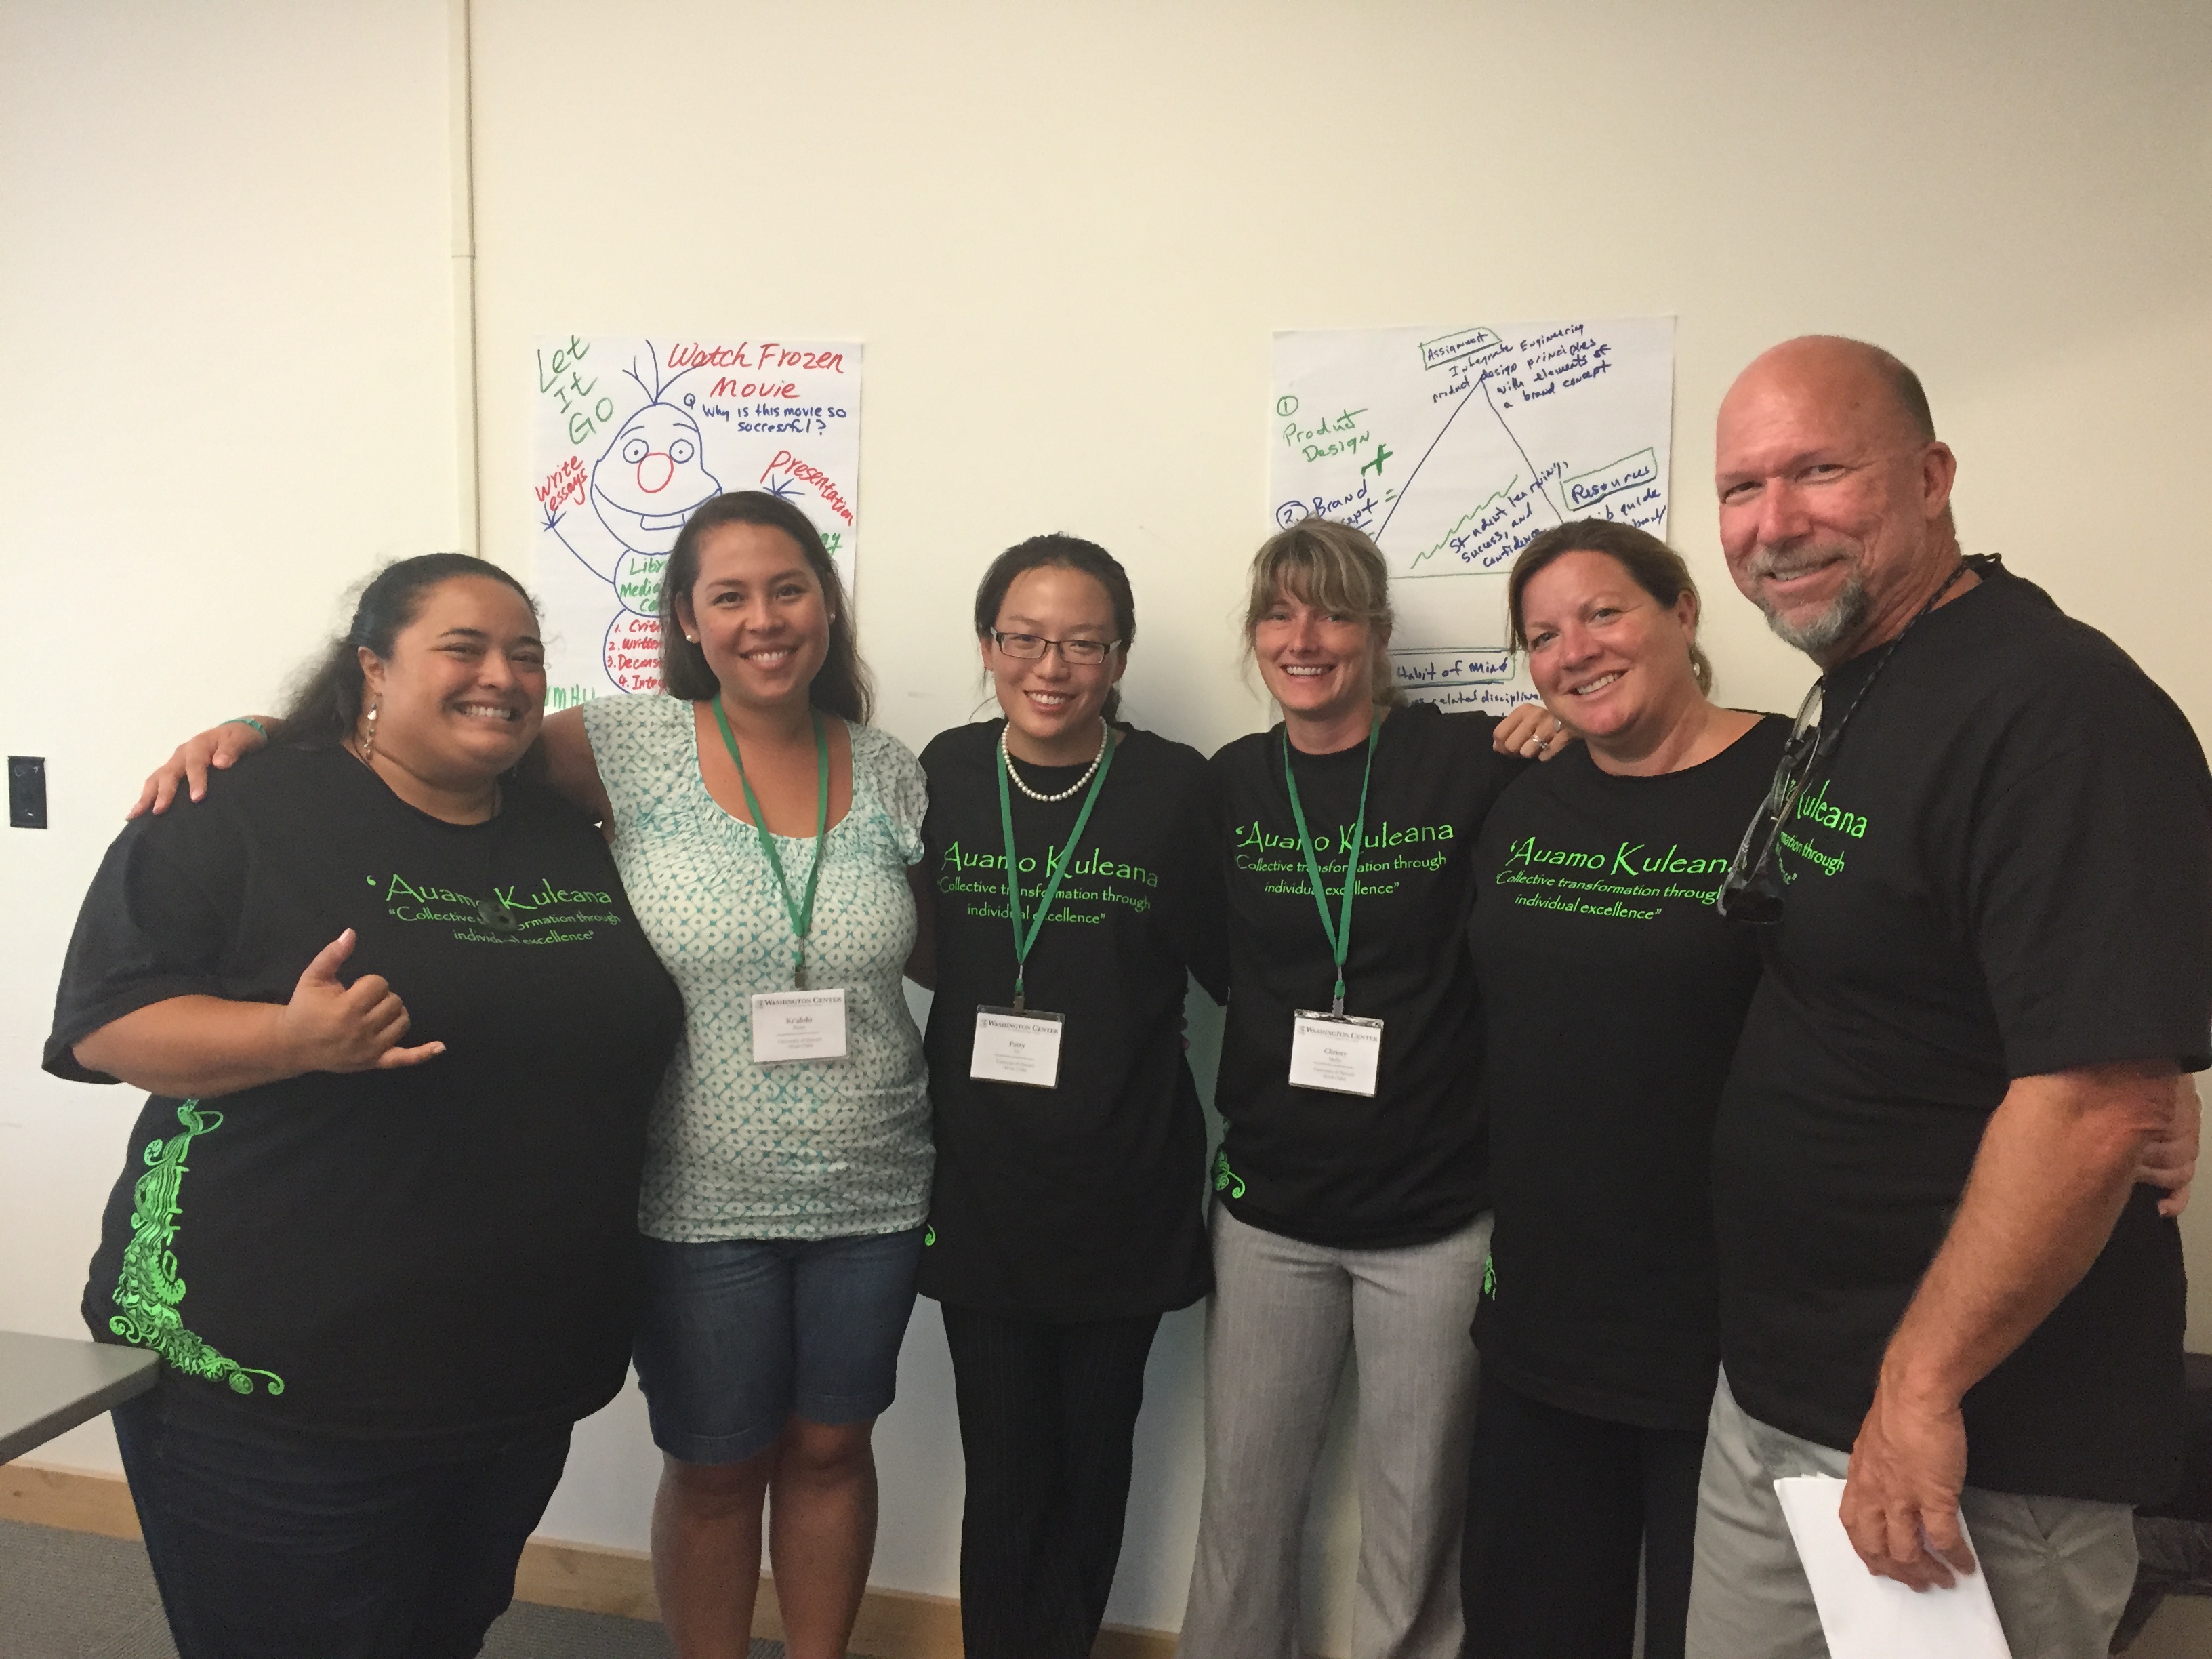 From left to right: Tiana Henderson, Kealohi Perry, Patricia Yu, Christy Mello, Melissa Saul and Michael Hayes at the National Summer Institute on Learning Communities in Olympia, Washington.